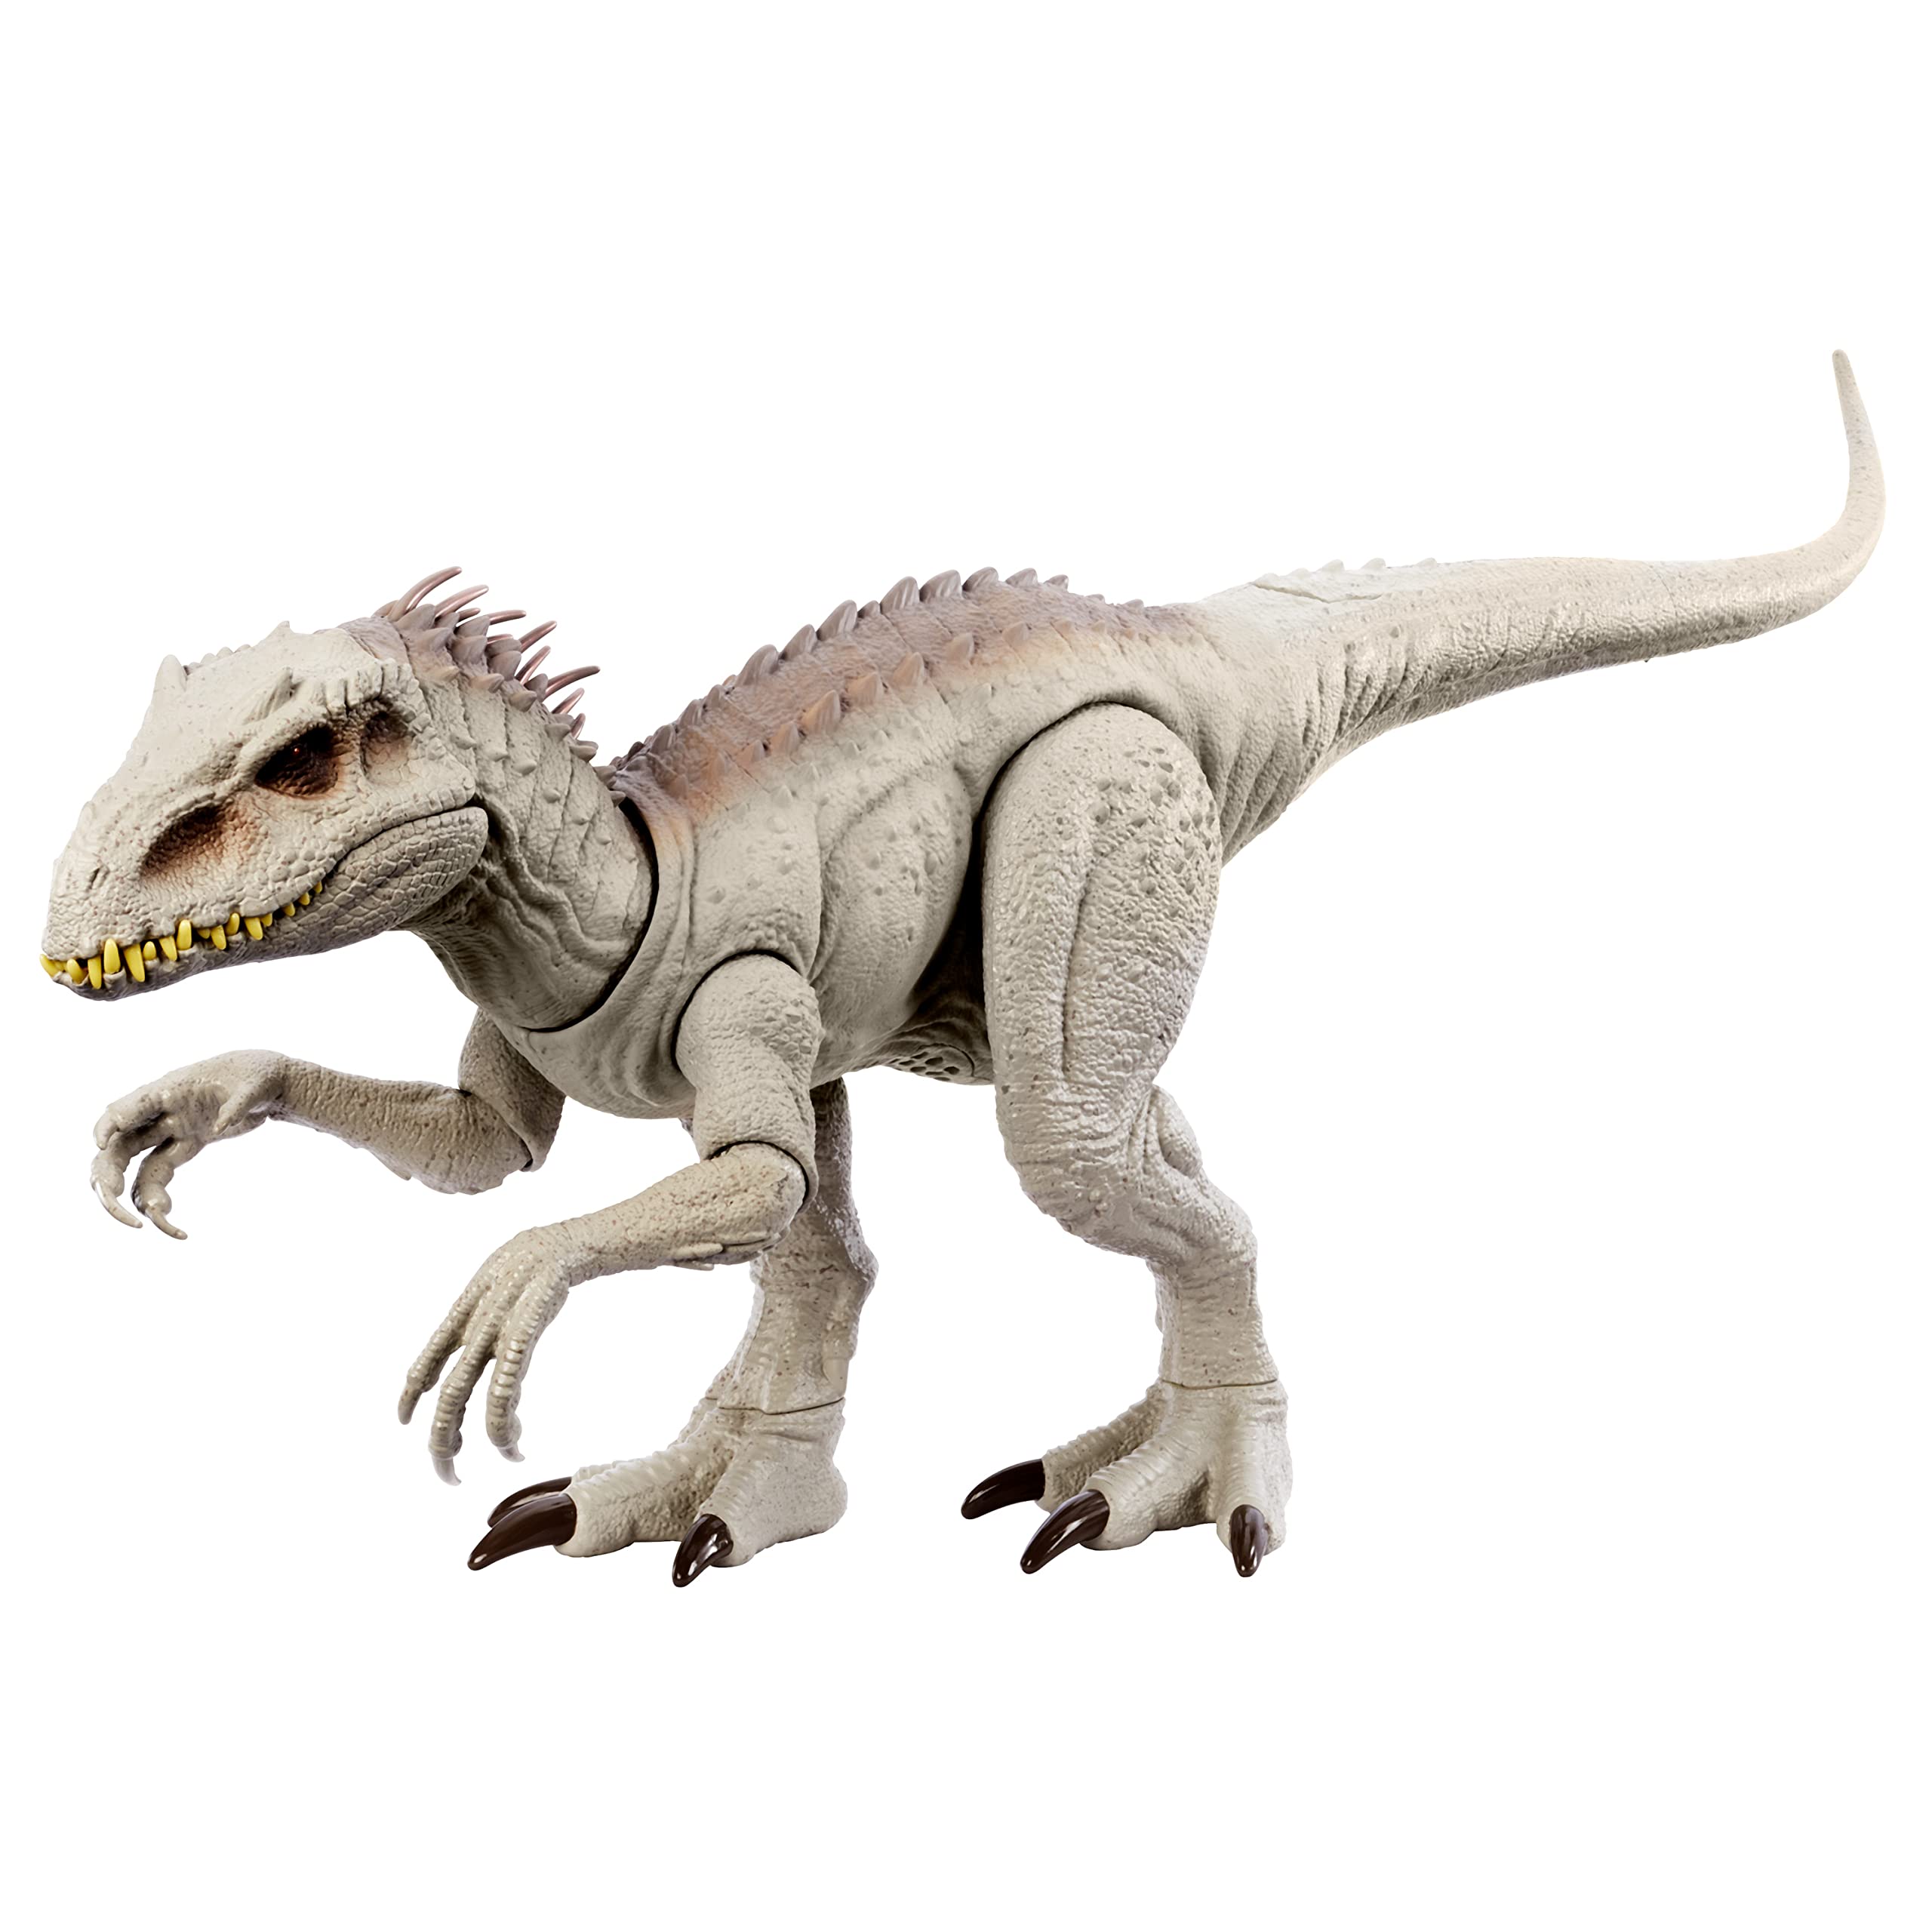 21" Jurassic World Camouflage 'N Battle Indominus Rex Dinosaur Toy w/ Lights, Sounds and Motion $19 + Free Shipping w/ Walmart+ or $35+